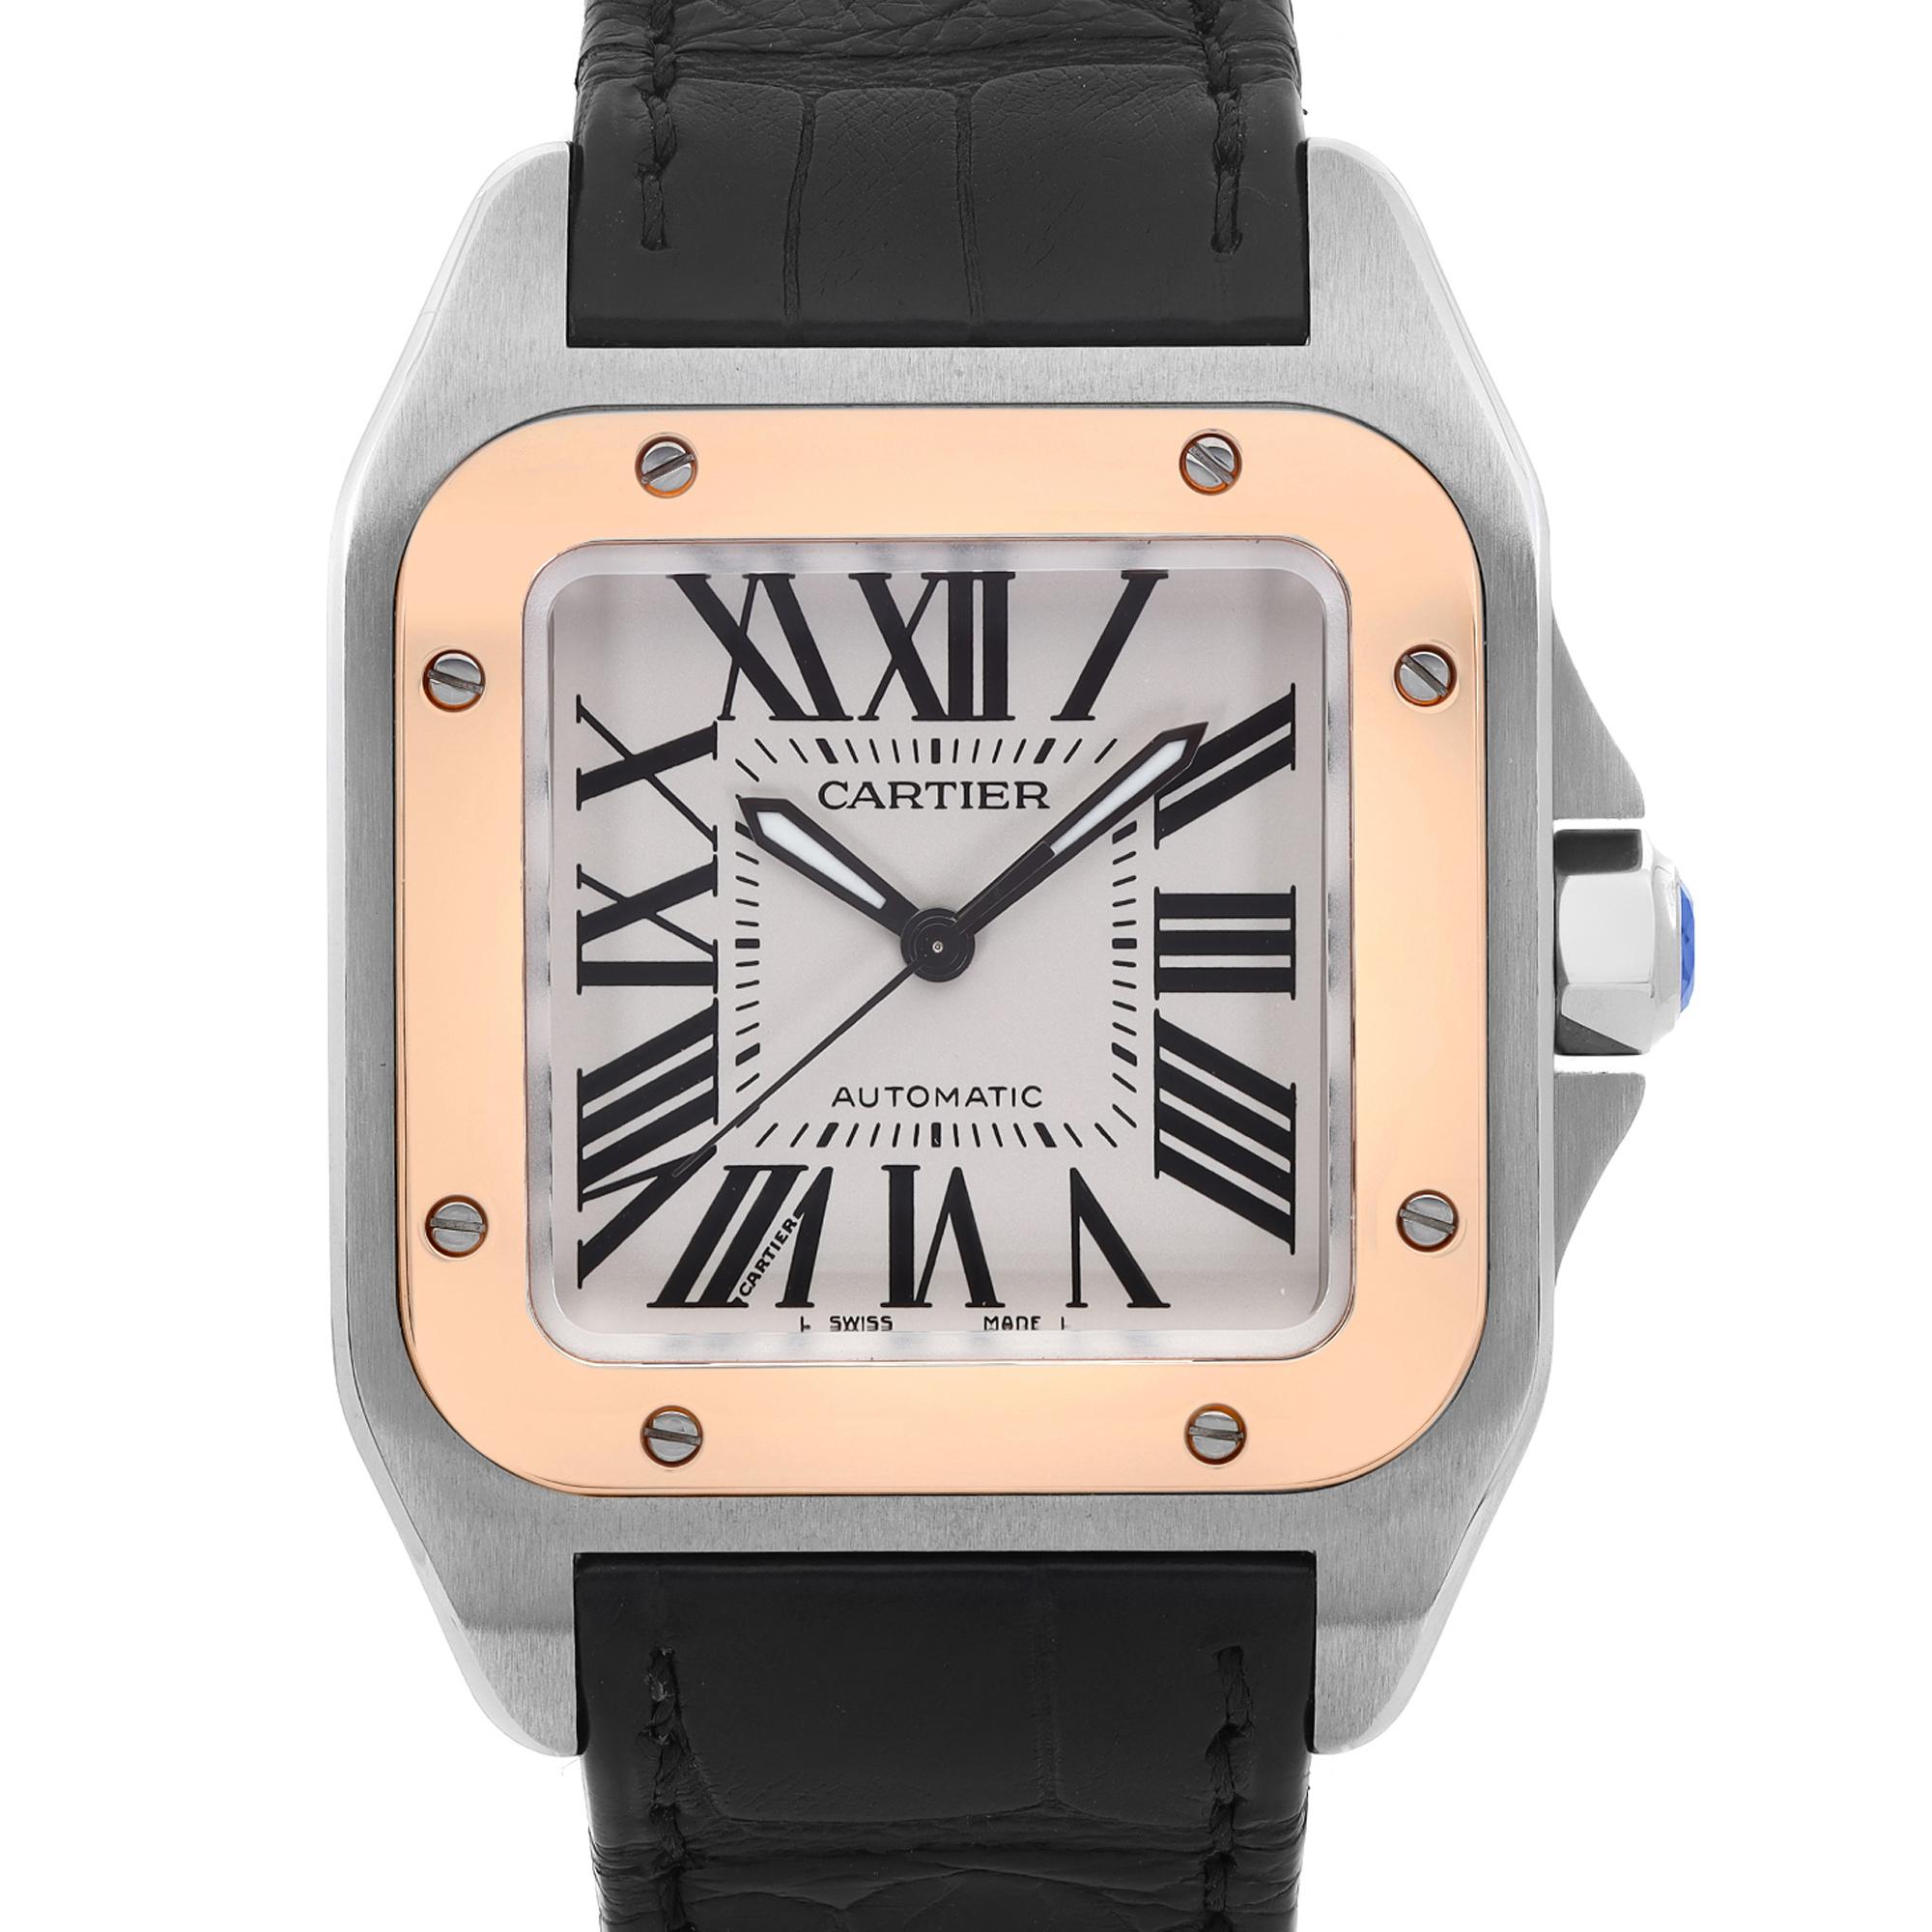 The band is Never used. Watch is in excellent condition Near to mint. 

 Brand: Cartier  Type: Wristwatch  Department: Men  Model Number: W20107X7  Style: Luxury  Vintage: No  Movement: Mechanical (Automatic)  Number of Jewels: 21 Jewels  Dial